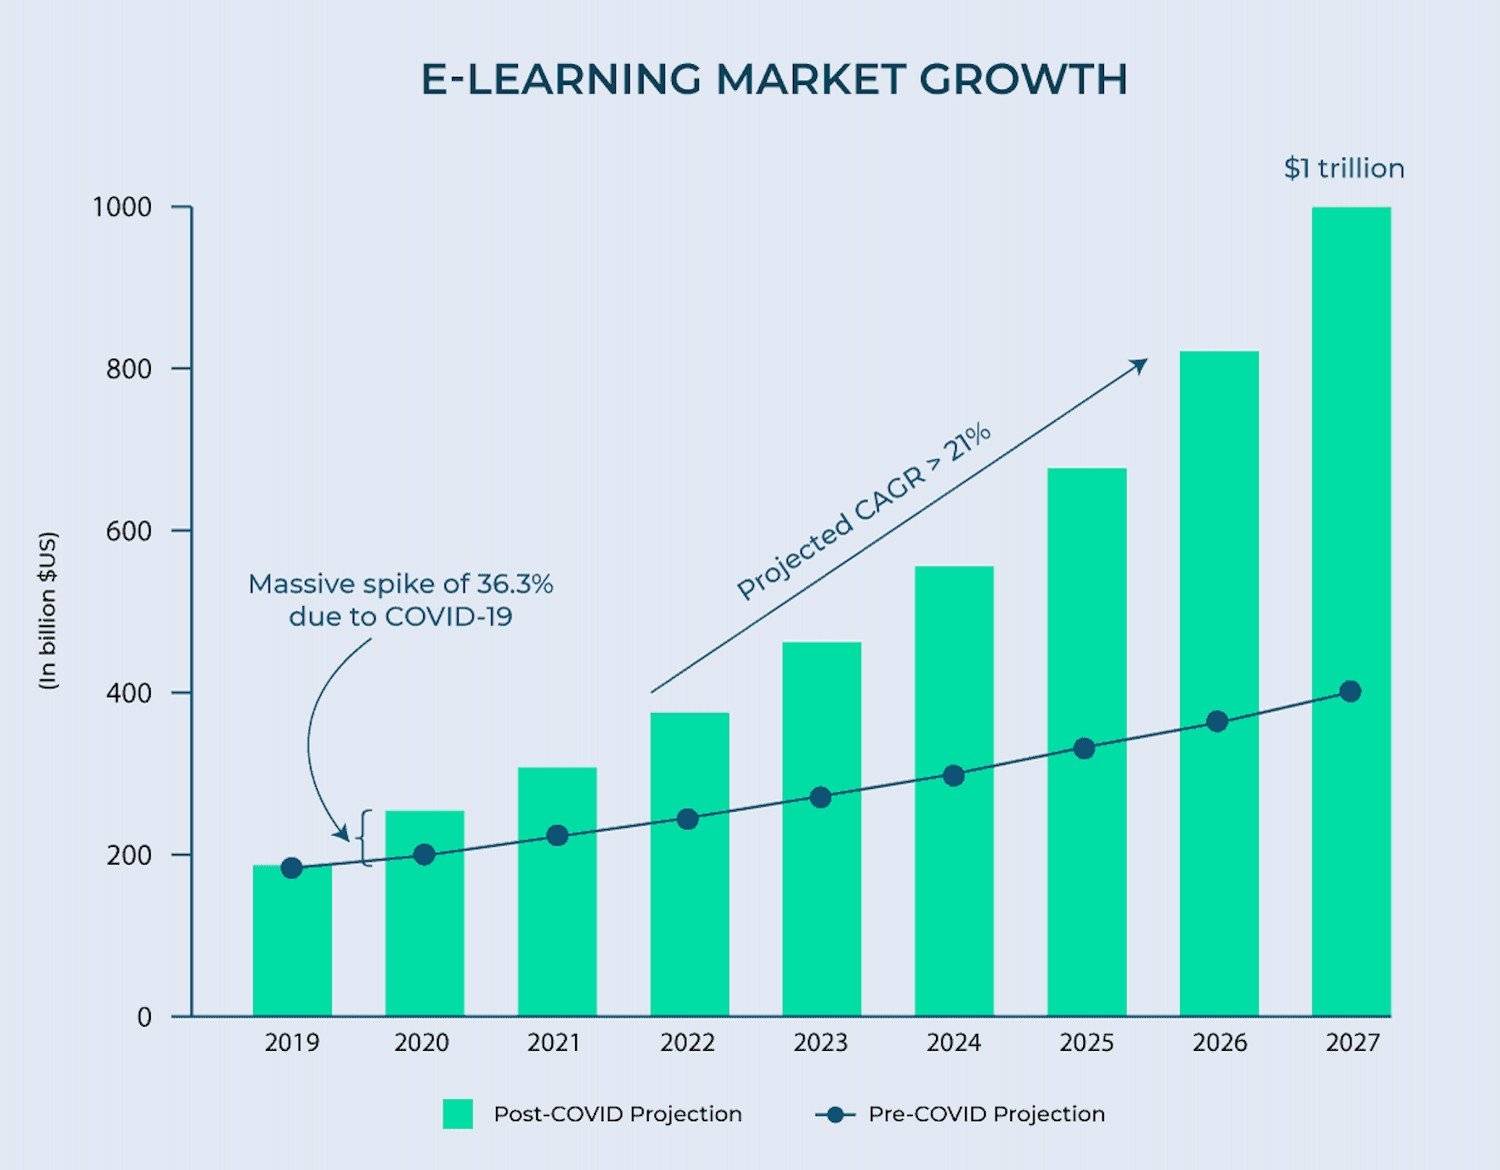 a chart showing the e-learning market growth potential from now until 2027